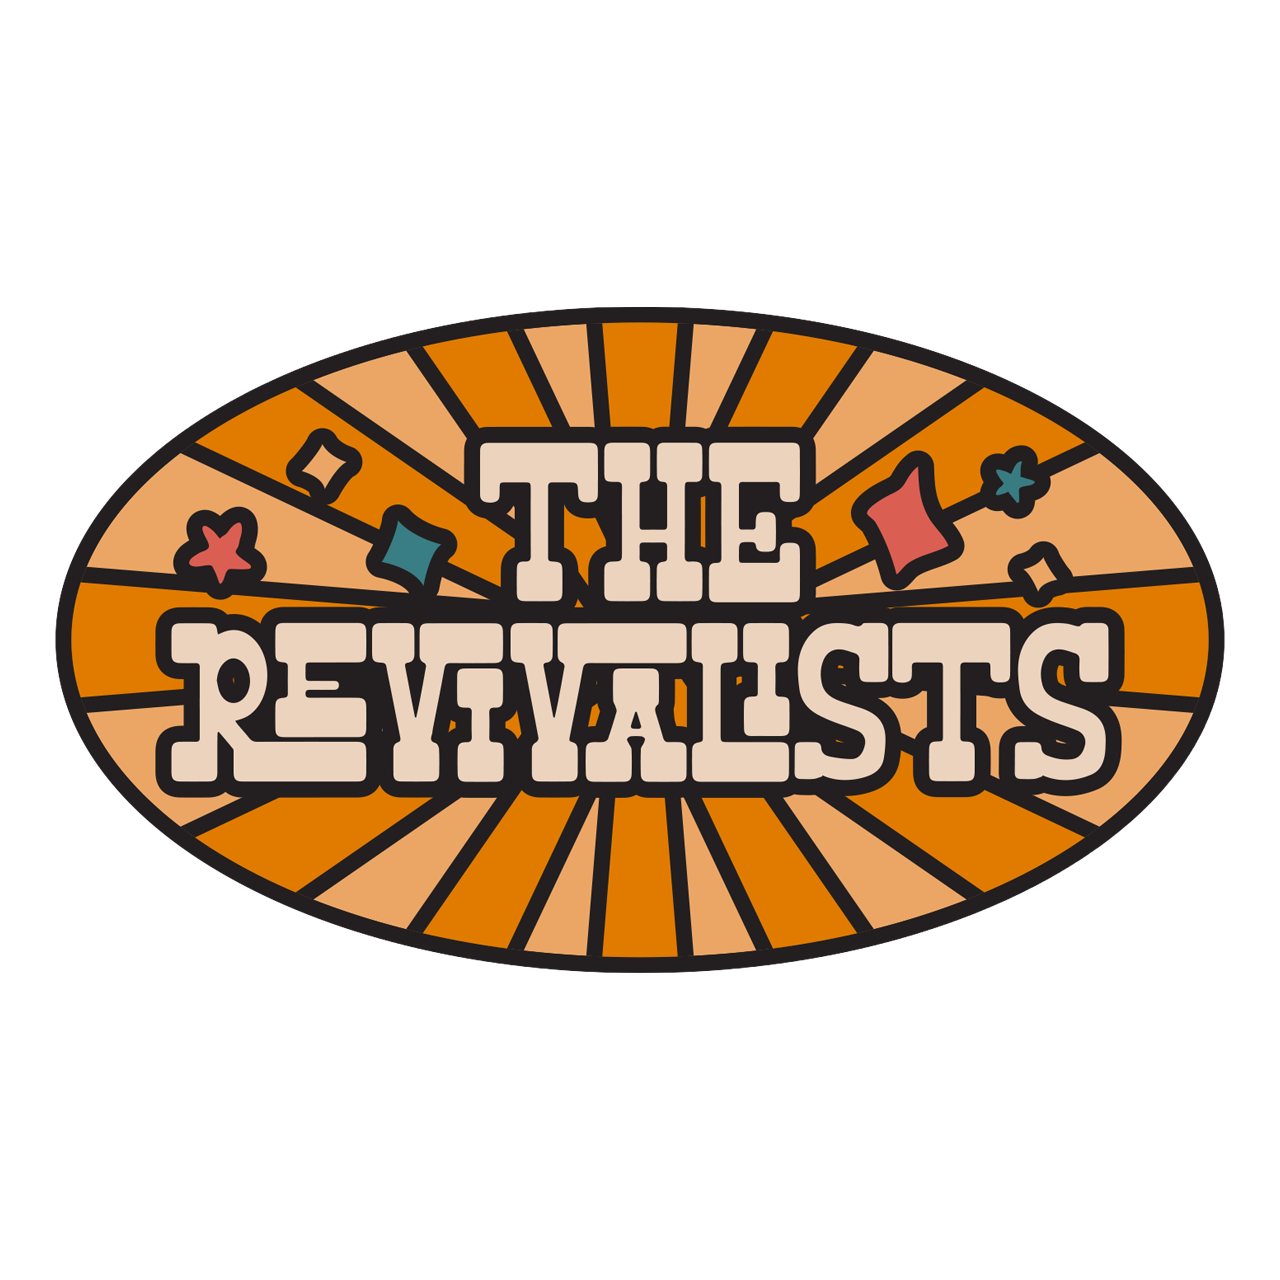 The Revivalists Sticker Pack